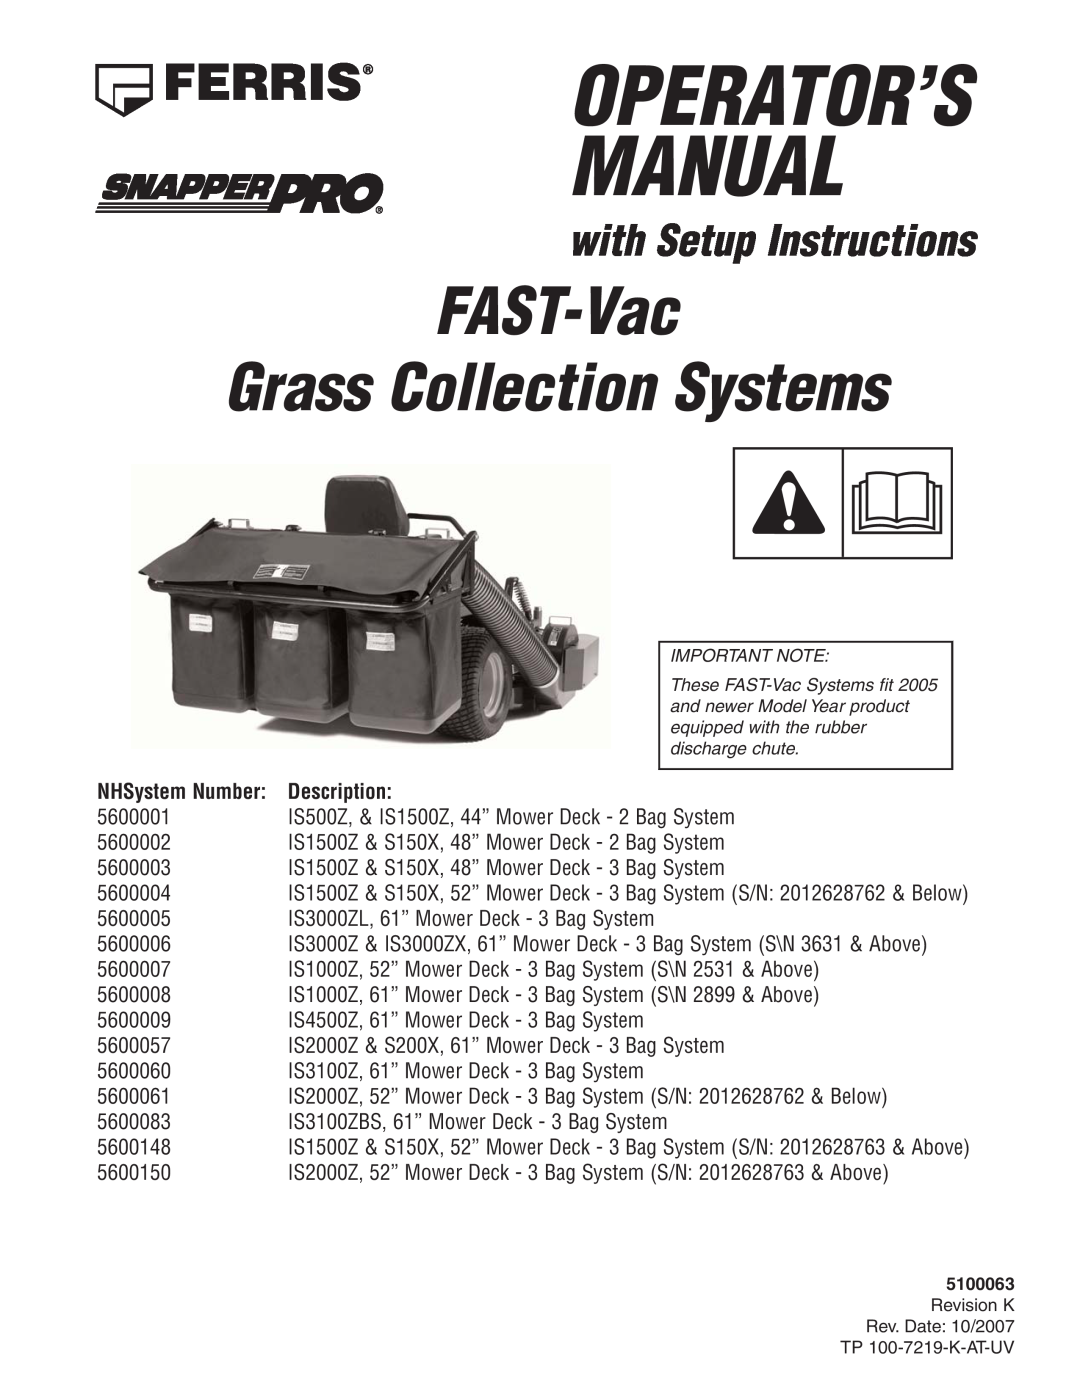 Snapper IS1500Z manual FAST-Vac Grass Collection Systems, Manual, Operator’S, with Setup Instructions, Description 